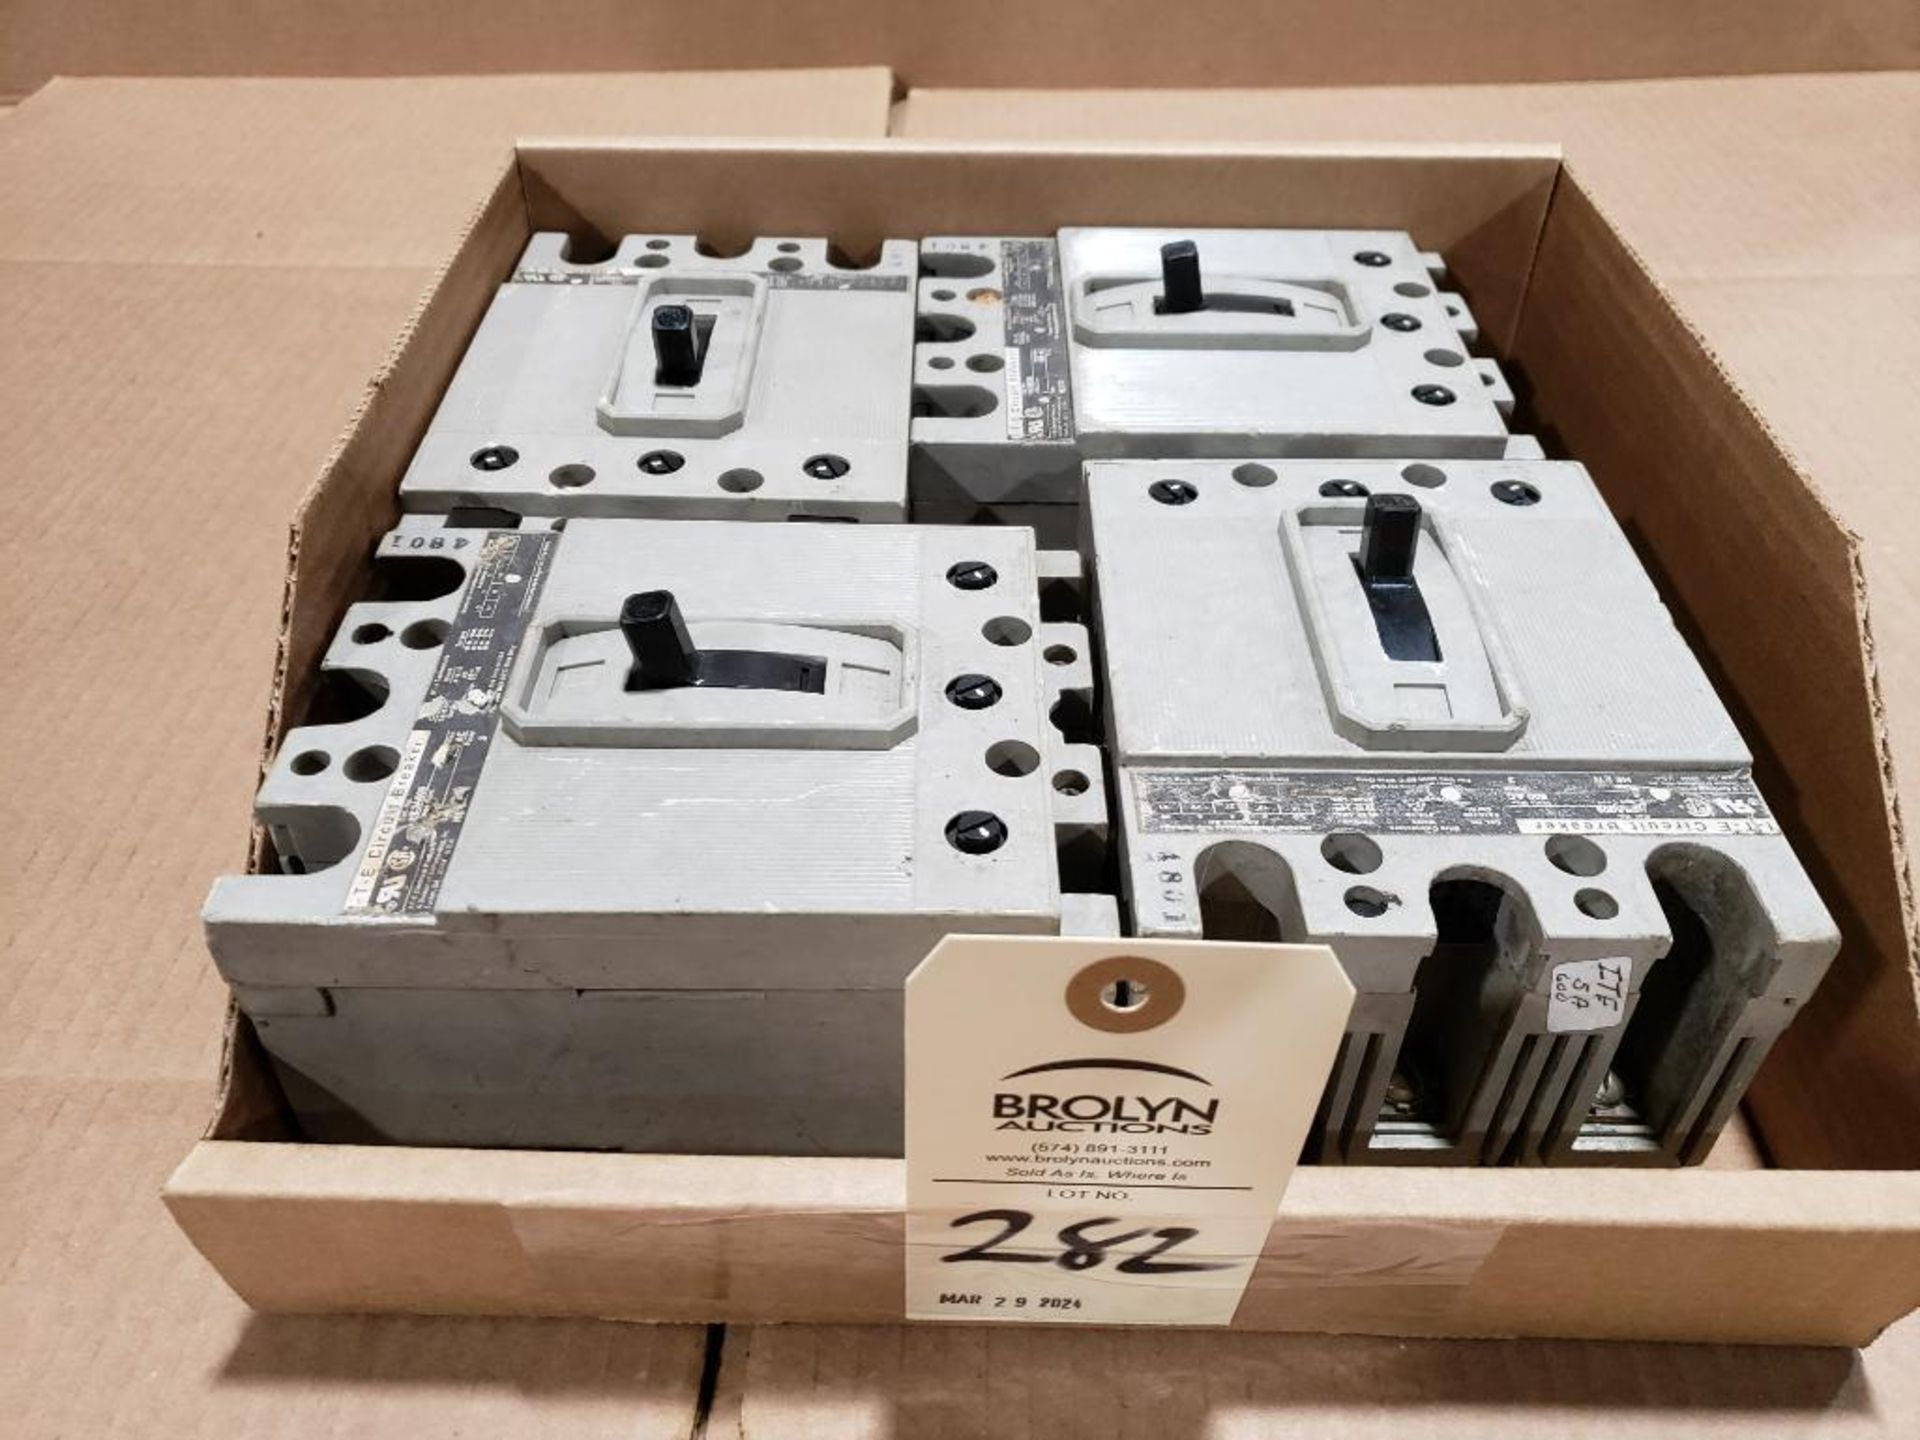 Qty 4 - Assorted molded case breakers.